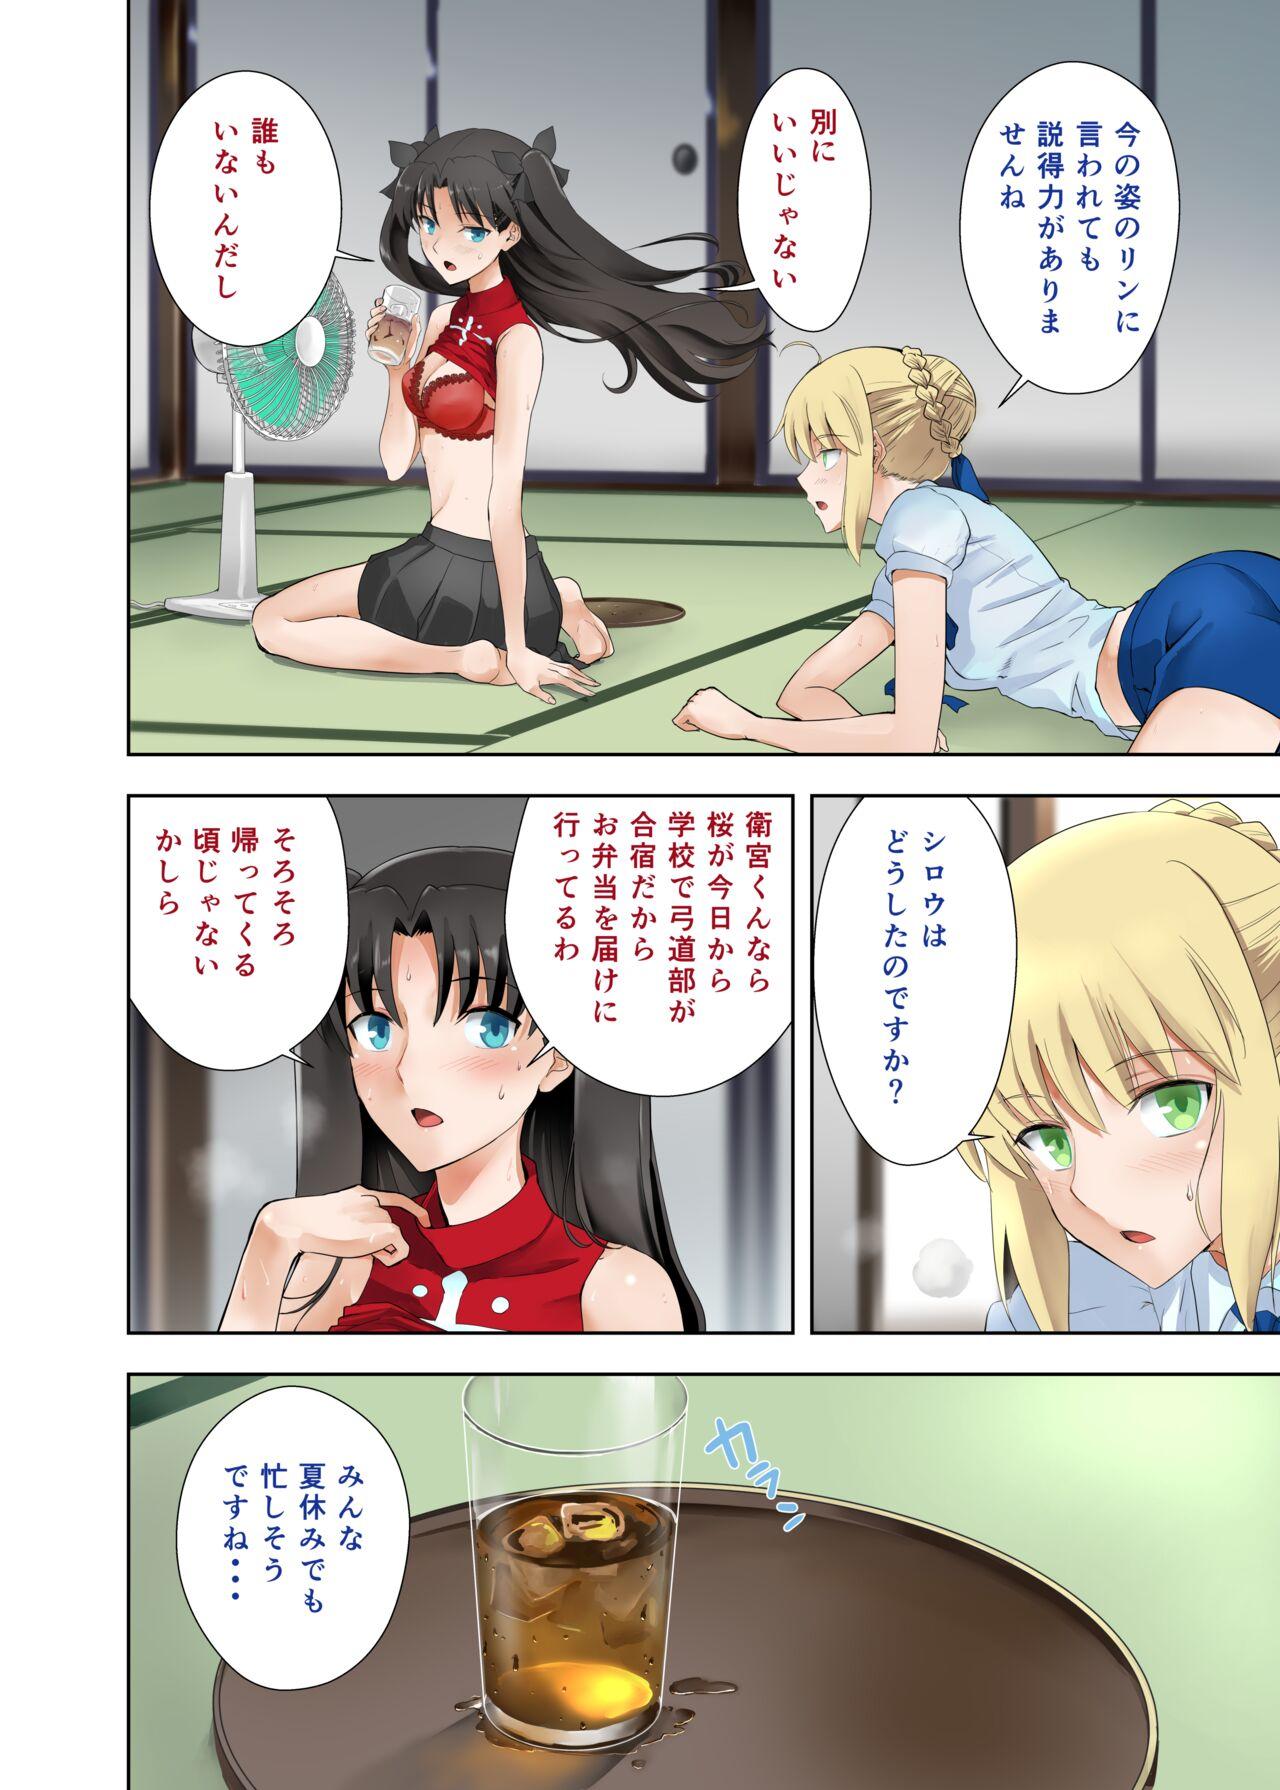 Emo Gay Saber's summer vacation - Fate stay night 18yo - Page 2